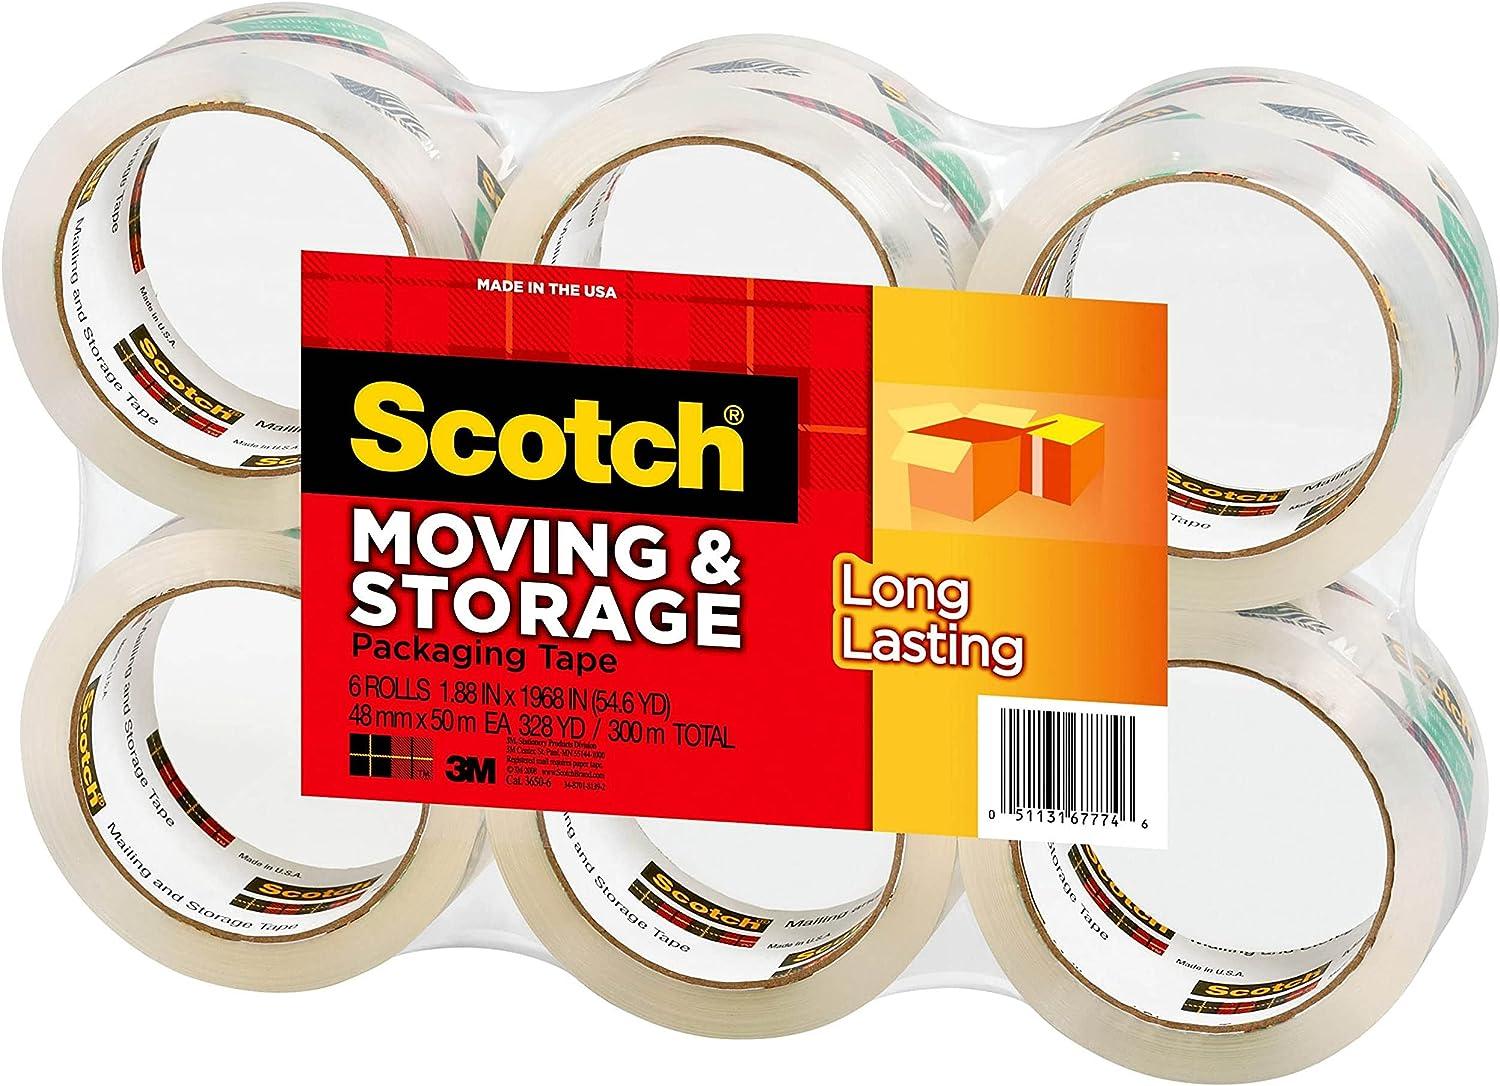 Scotch Moving & Storage Packaging Tape 1.88 Inch x 800 Inch Clear/White